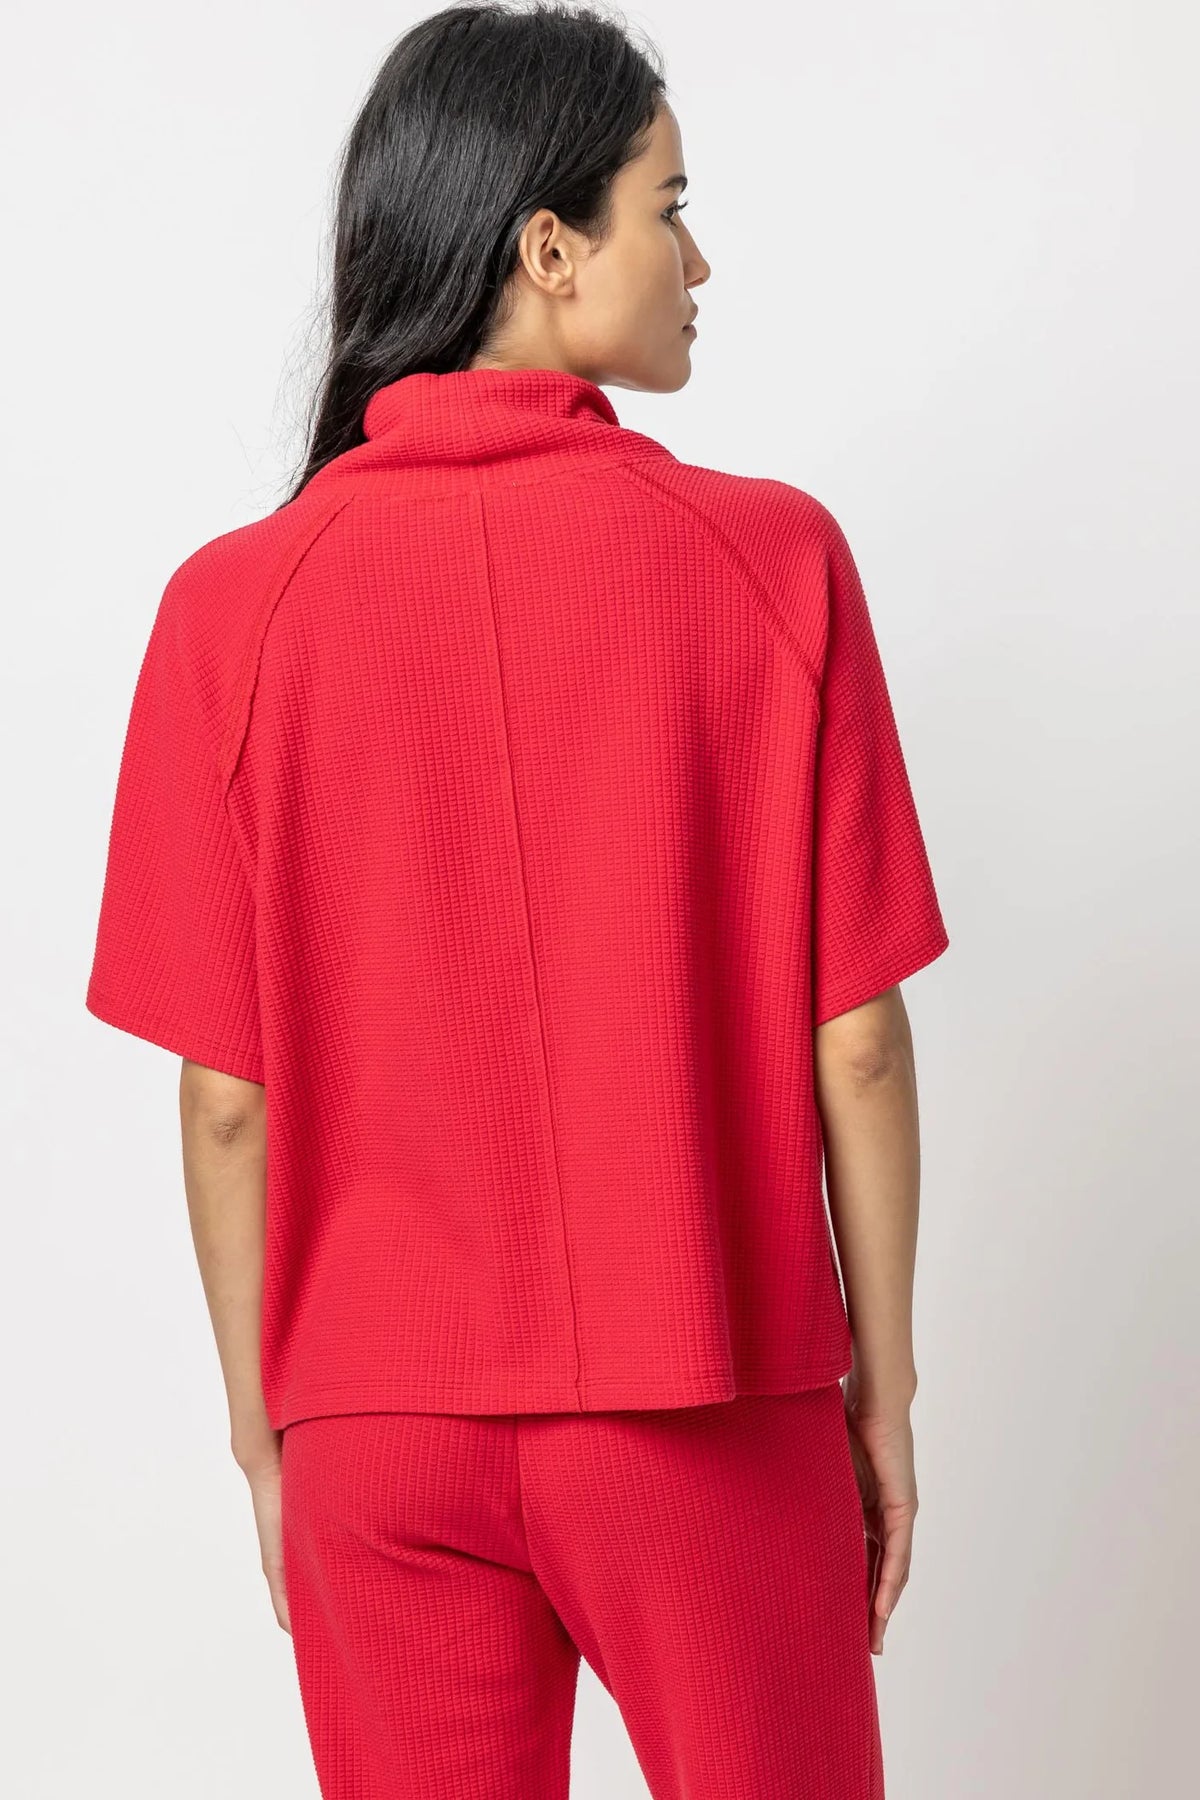 Elbow Sleeve Poncho Top in Cerise